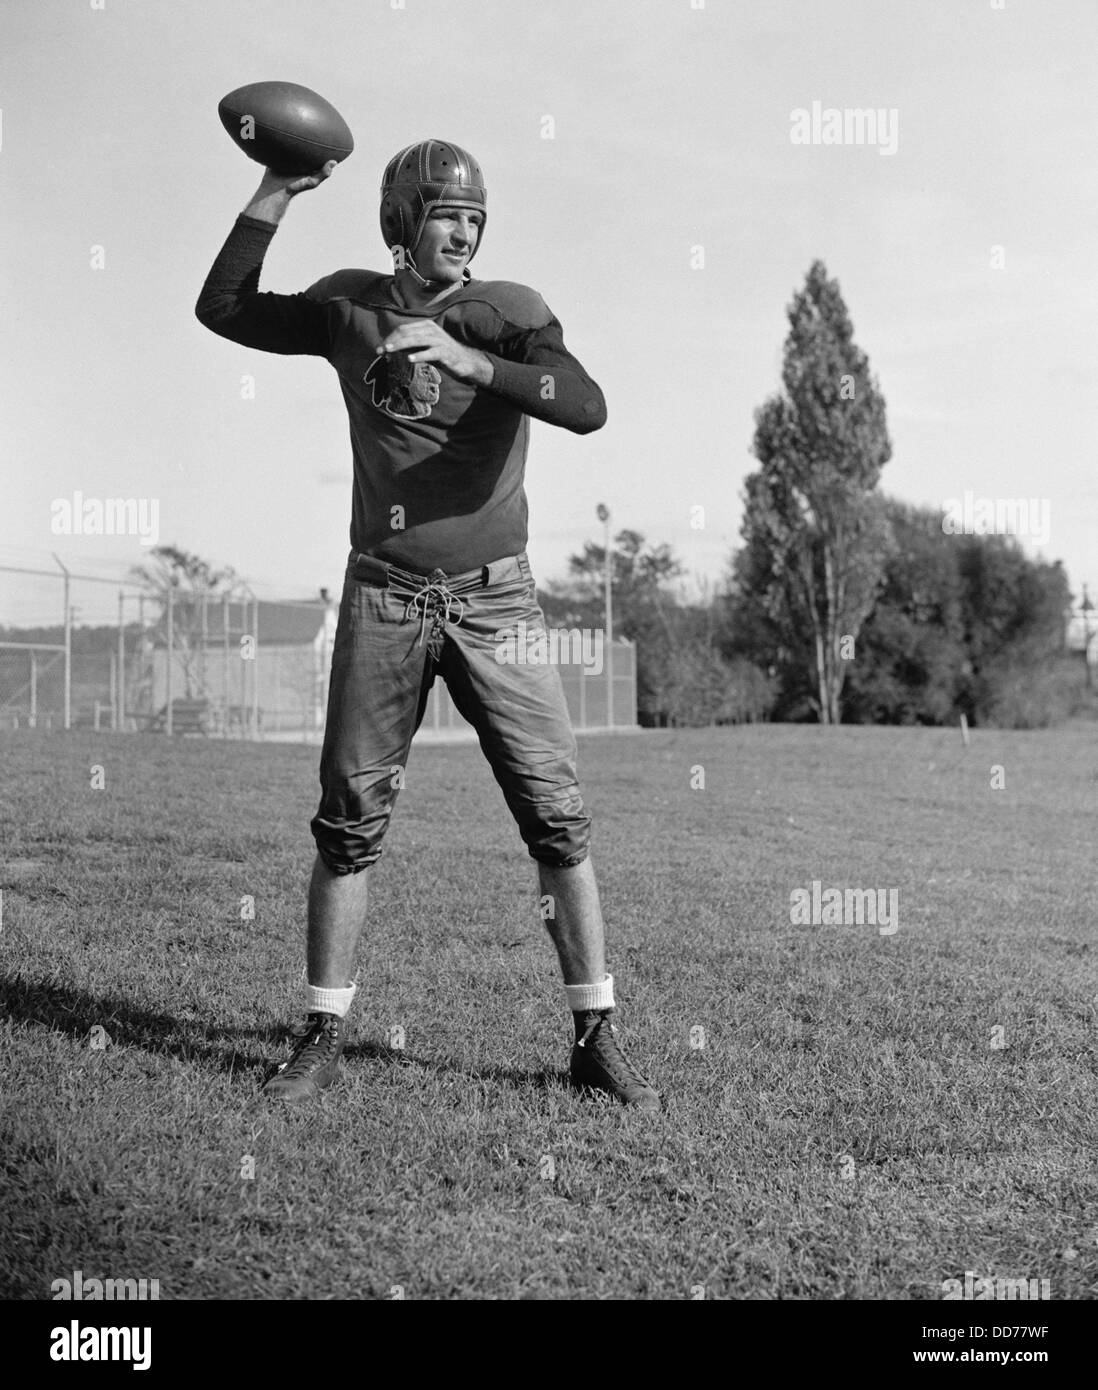 Sammy Baugh in his first season with the Washington Redskins, 1937. The 24 year old, 190 lb., 6 foot rookie would play with the Stock Photo